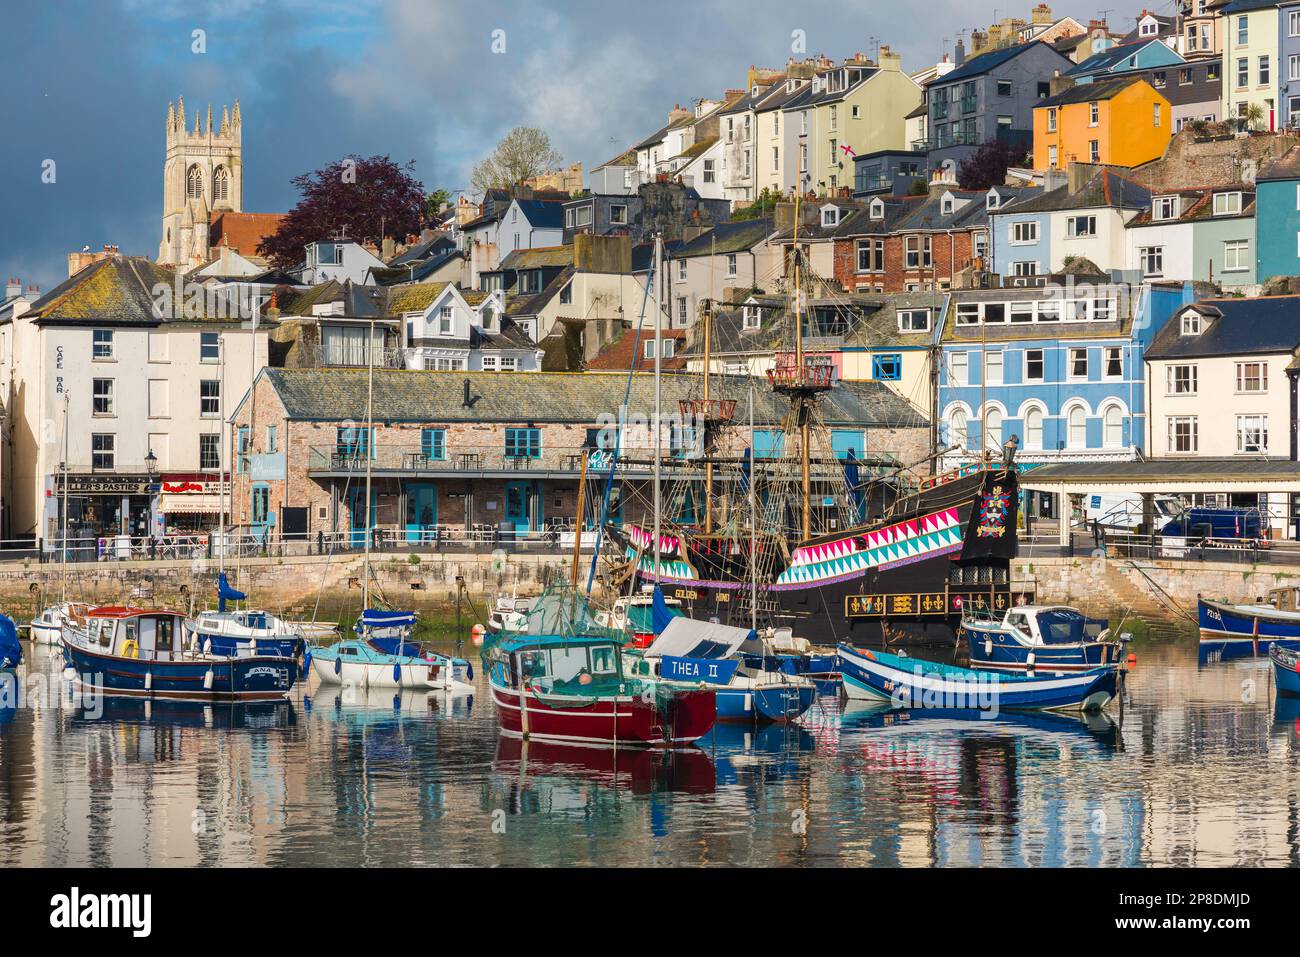 Devon seaside town, view of fishing boats and a replica of the historic Golden Hind in the harbour at Brixham, Torbay, Devon, south west England, UK Stock Photo